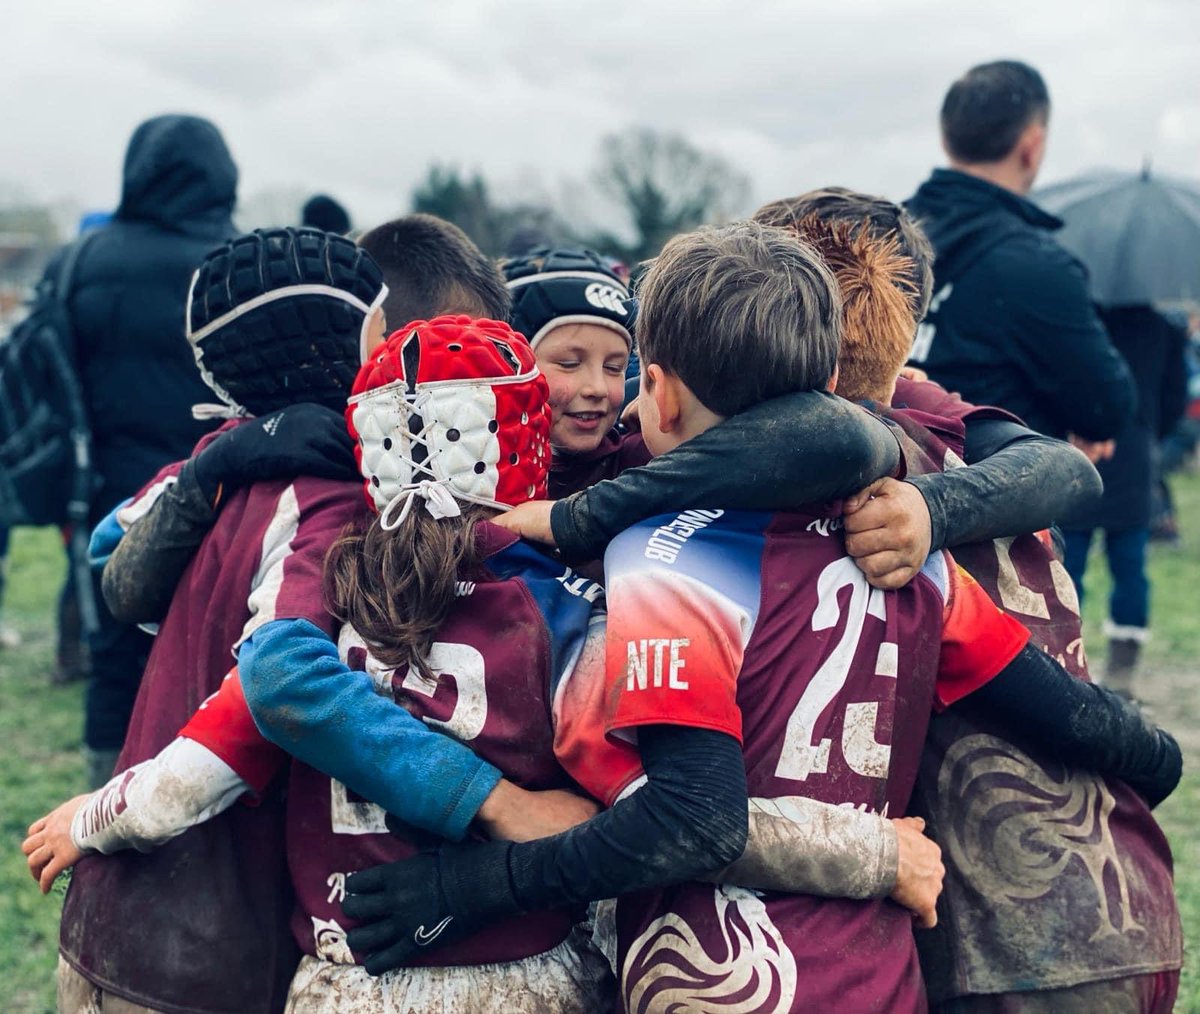 Thank you to all the clubs who came and participated in a very soggy U10’s Middlesex Festival. A brilliant day hosting each and every one of you. What a privilege to see outstanding rugby from each and every player today - our rugby future looks bright in @middlesexrugby 🌟 🏉👌🏻